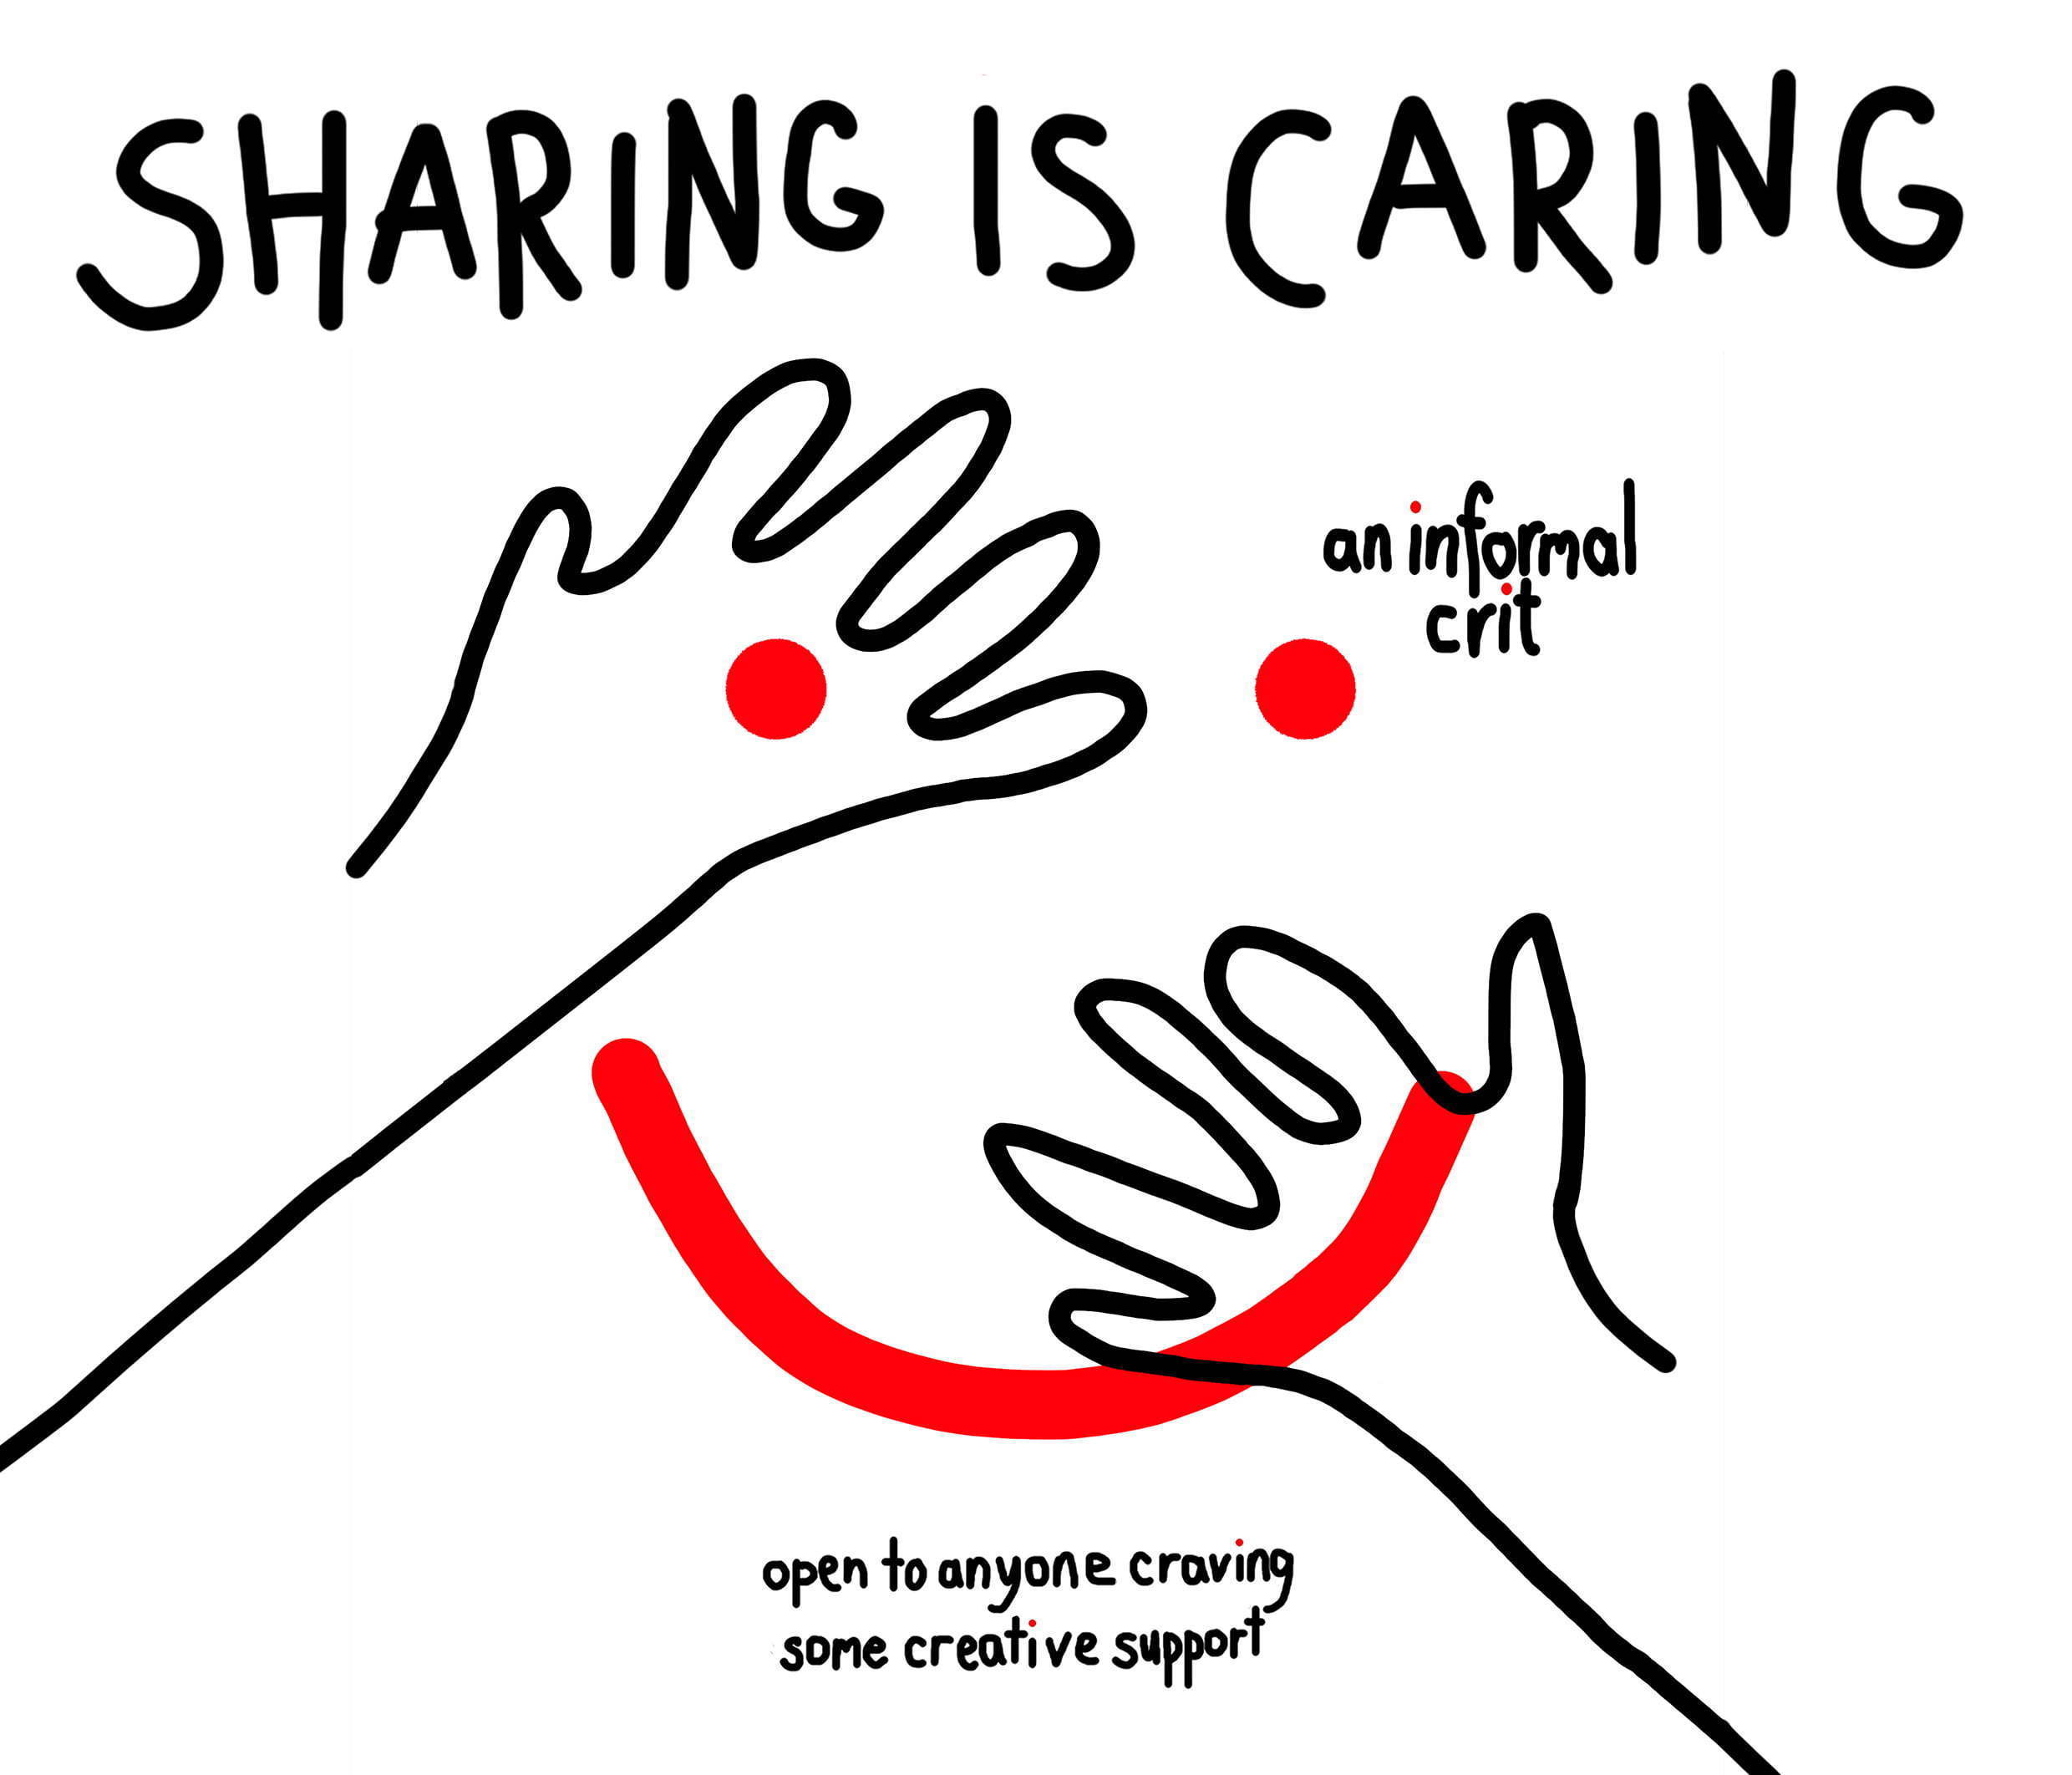 Sharing is caring poster. 